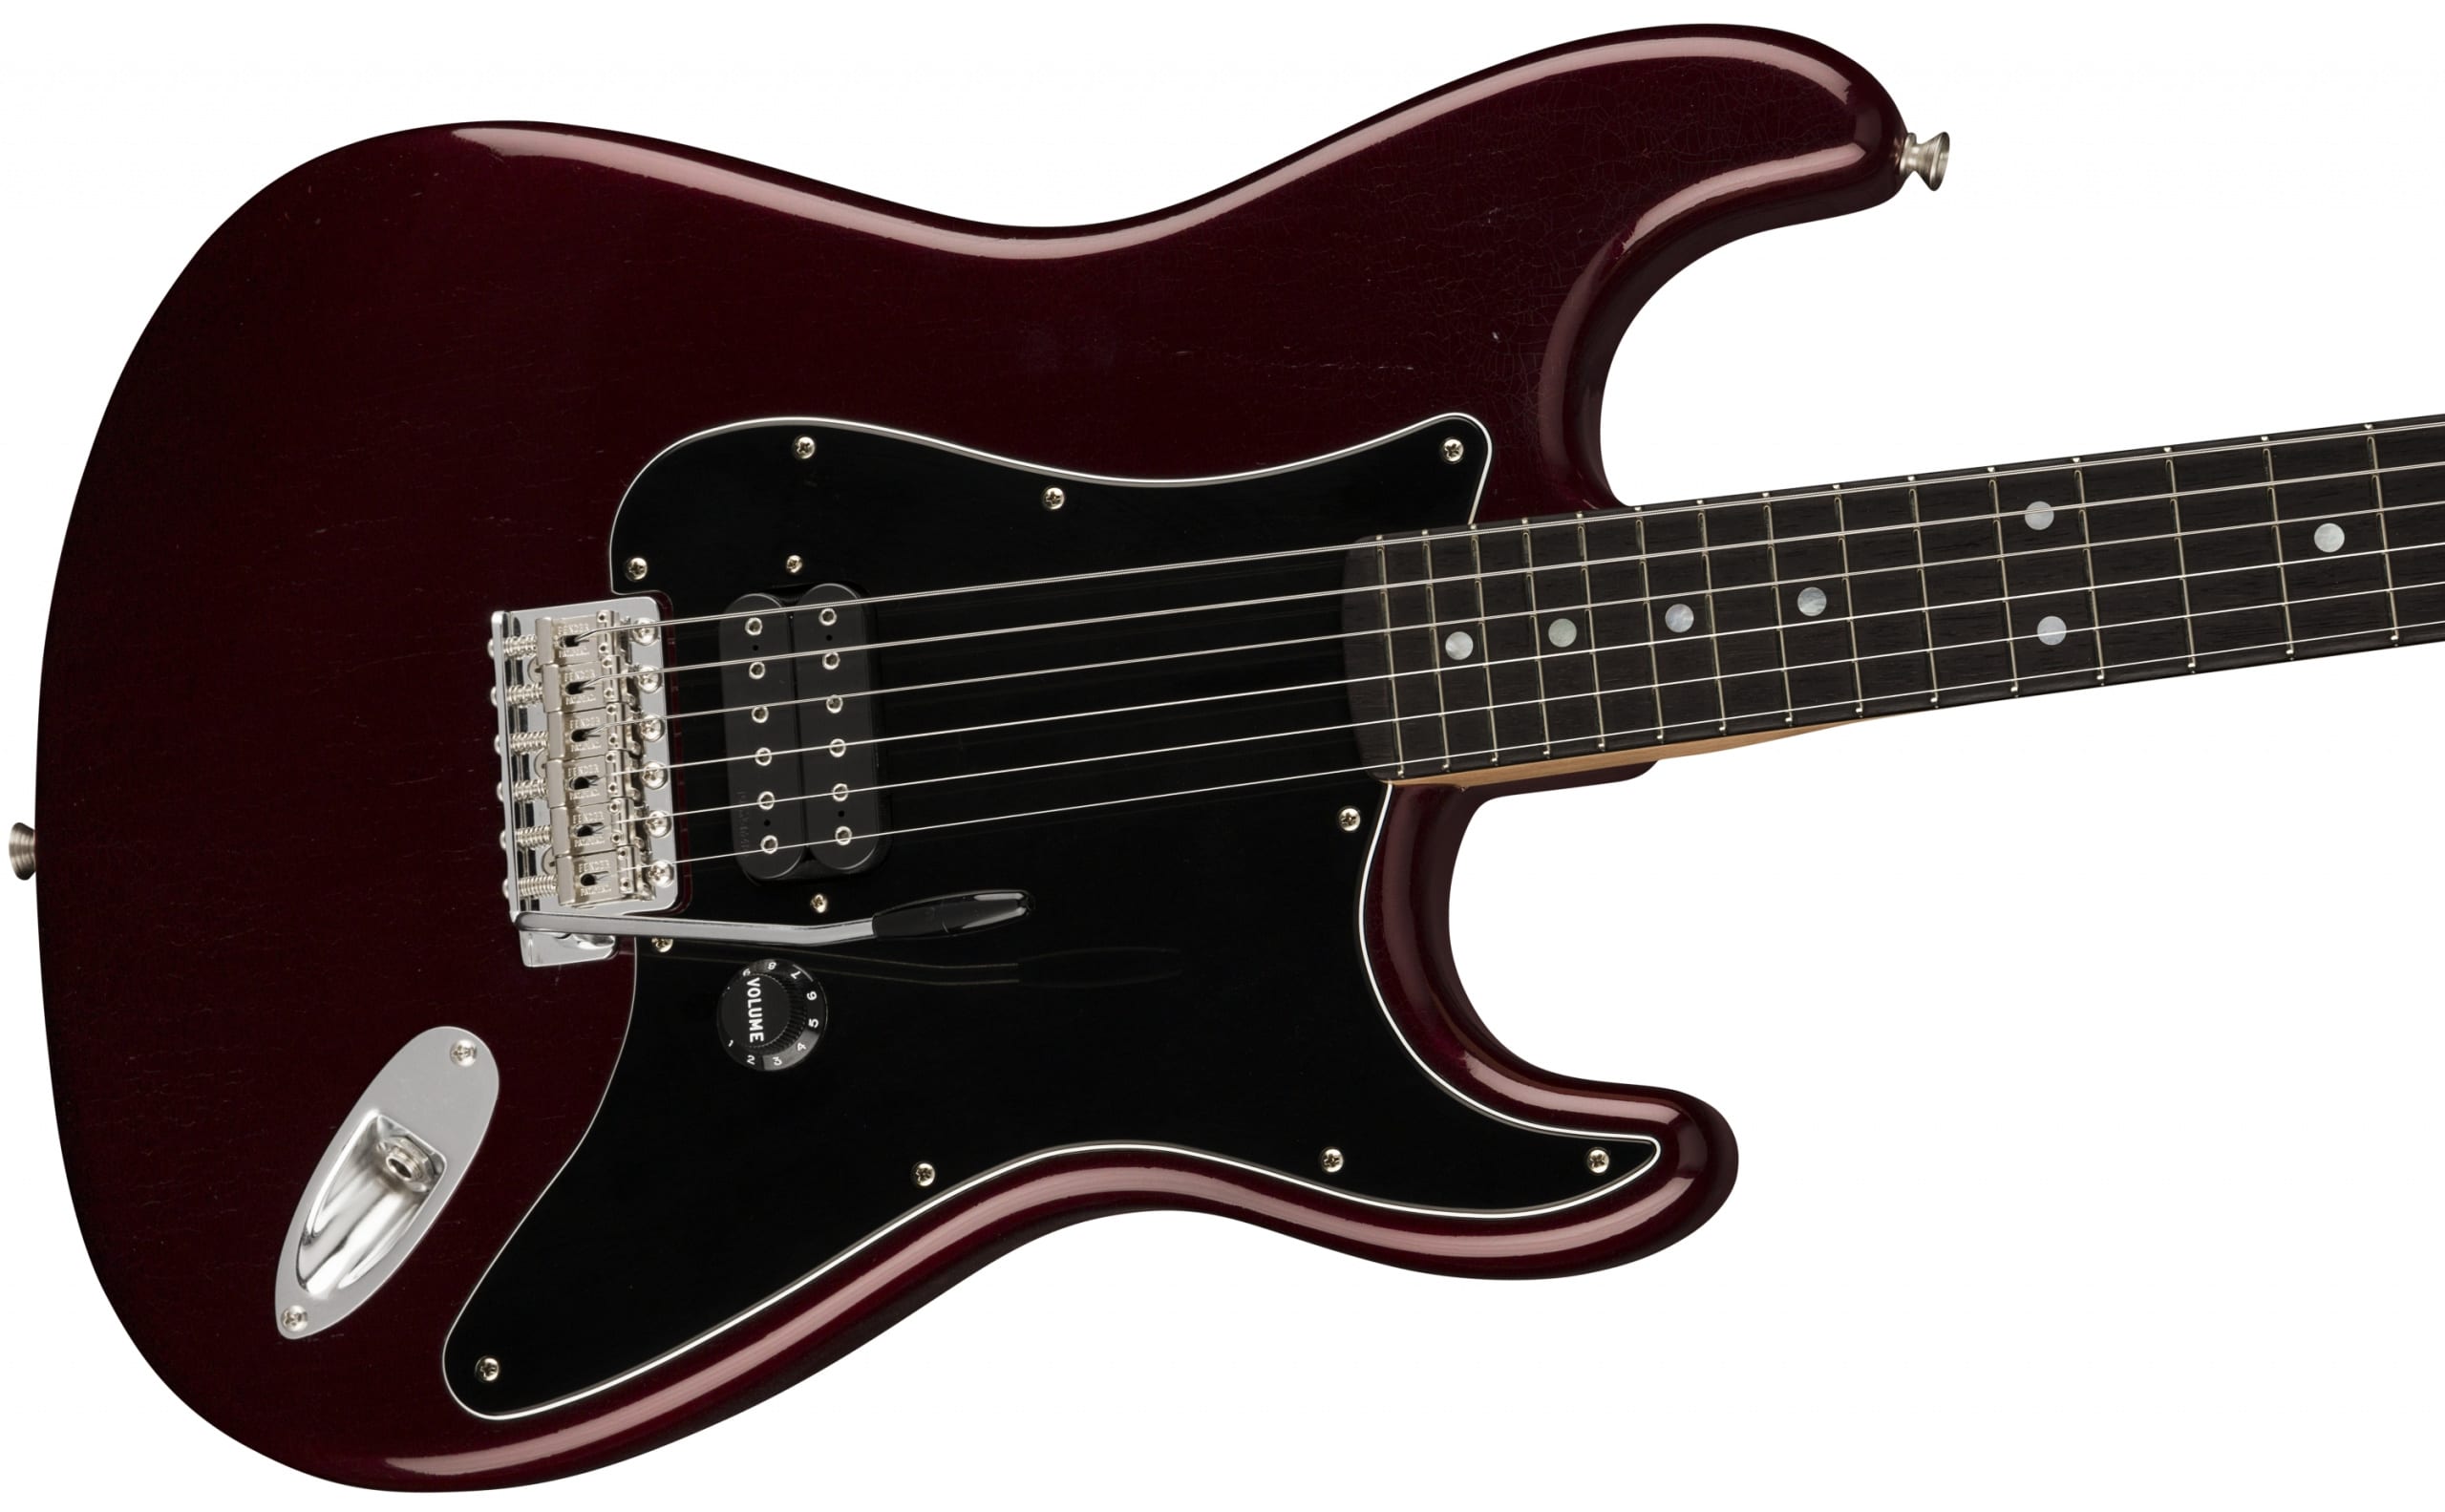 Fender Play Foundation Short Scale Strat in Oxblood by Carlos Lopez